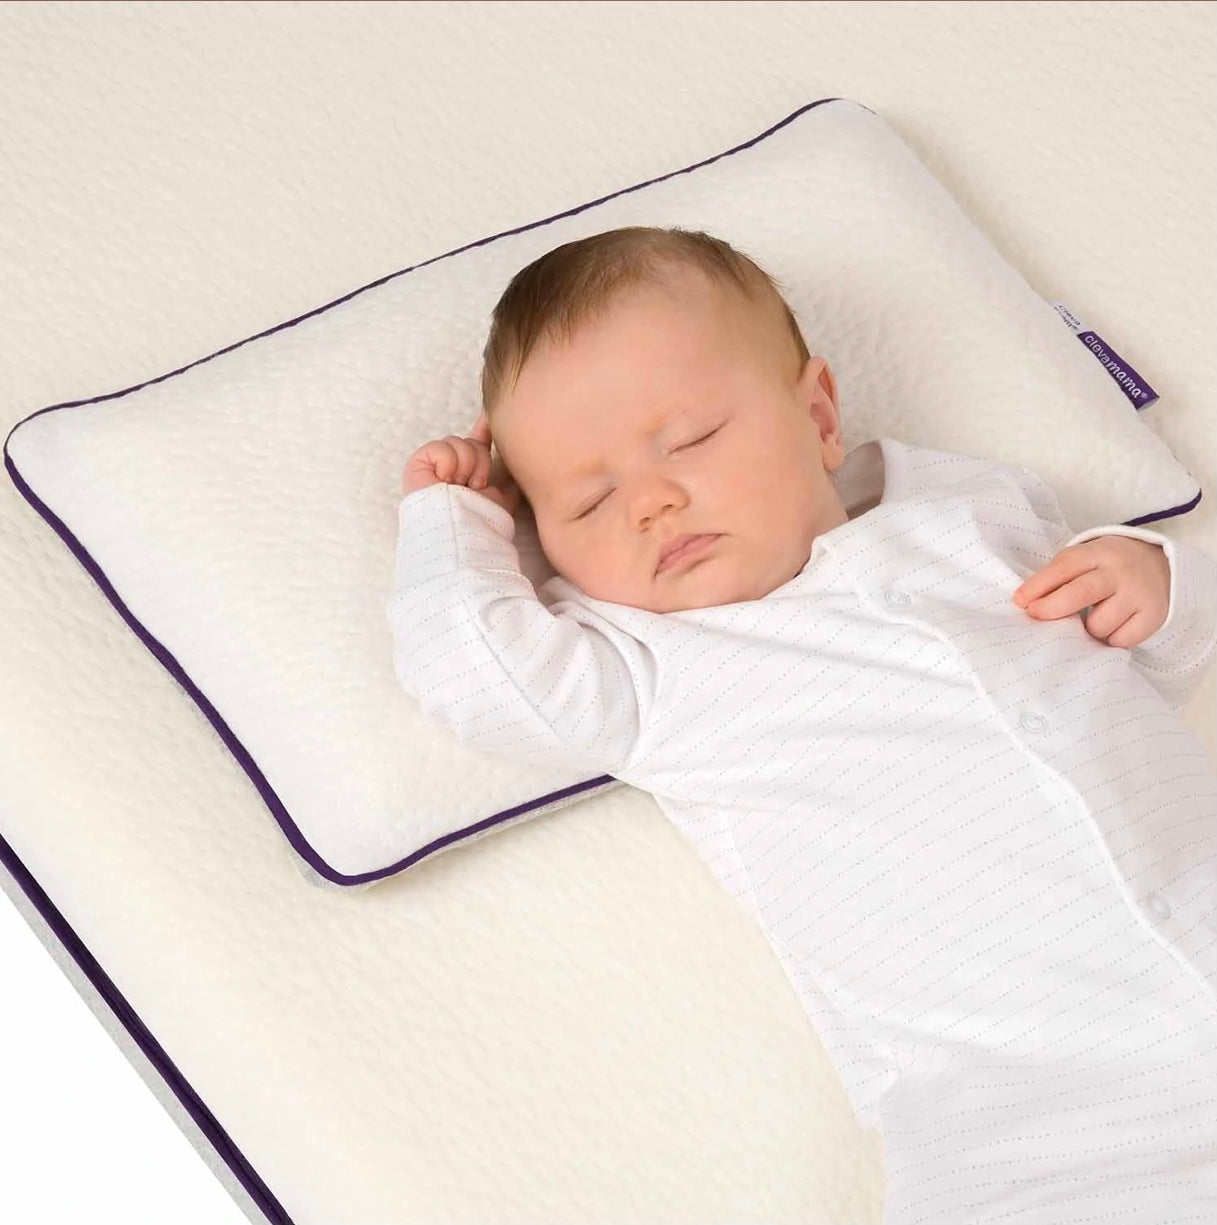 ClevaFoam® Baby Pillow Classic White/Soft Grey